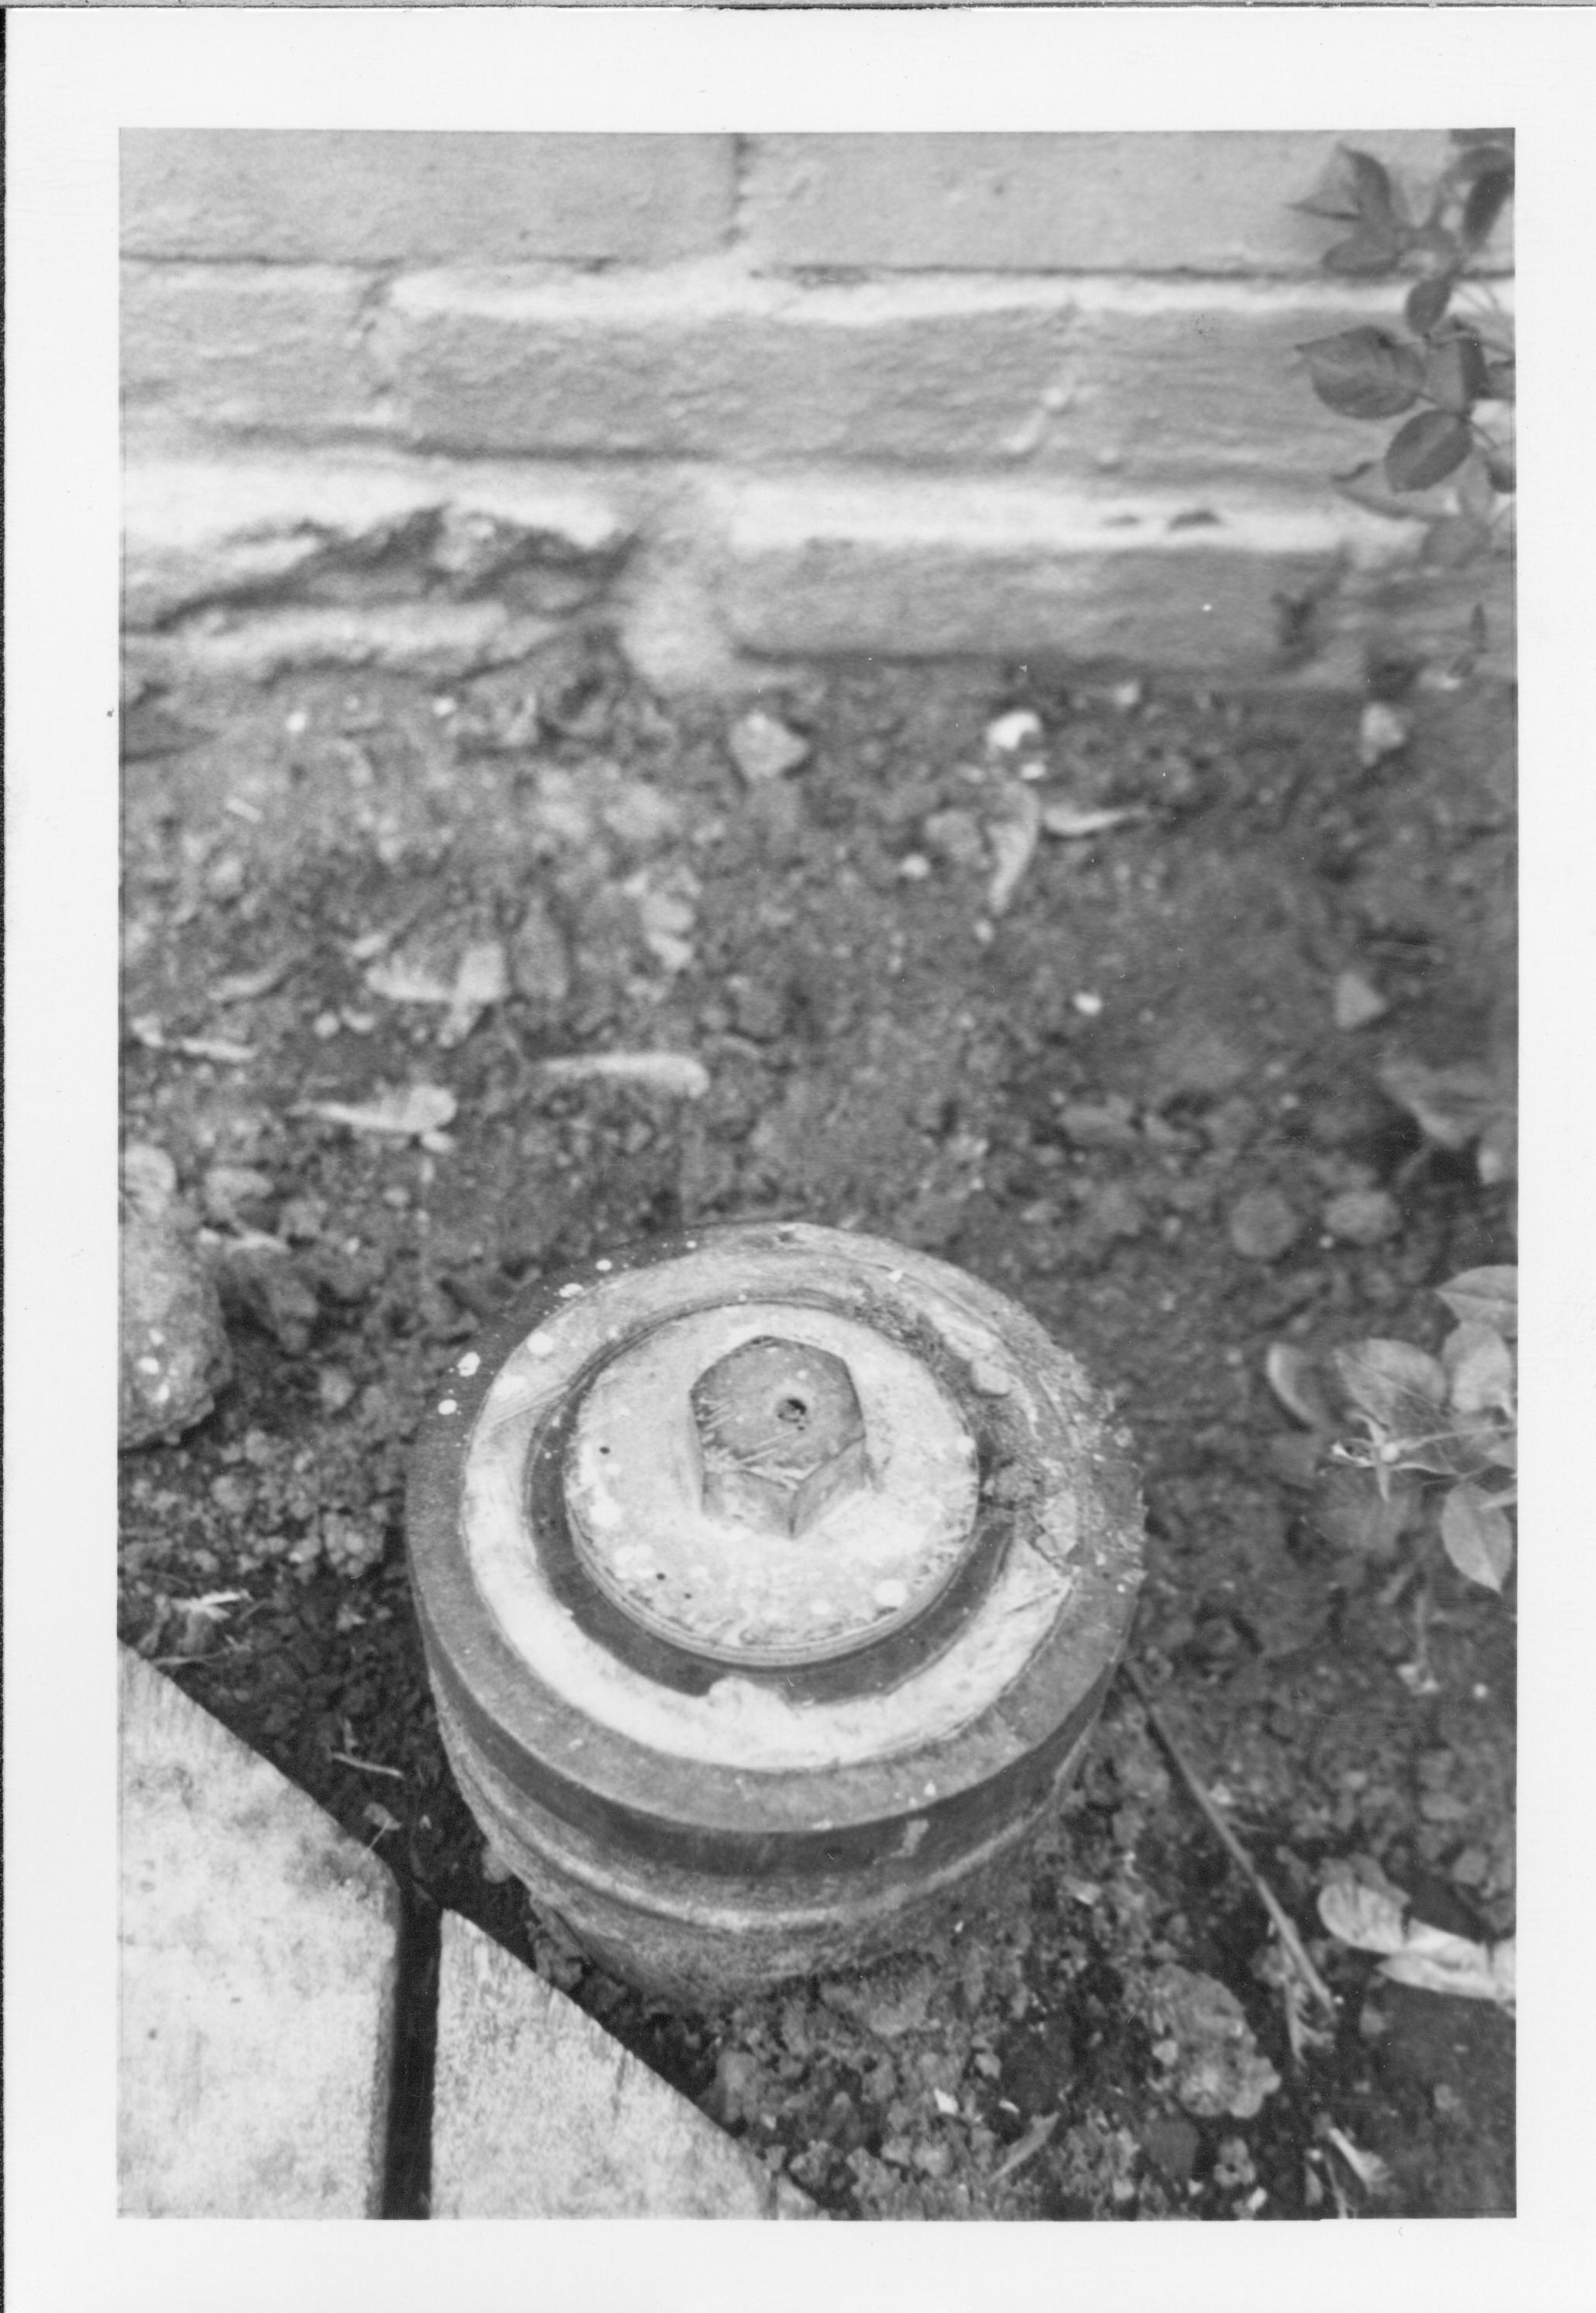 A capped pipe in the Lincoln Home yard. Exact location unknown.